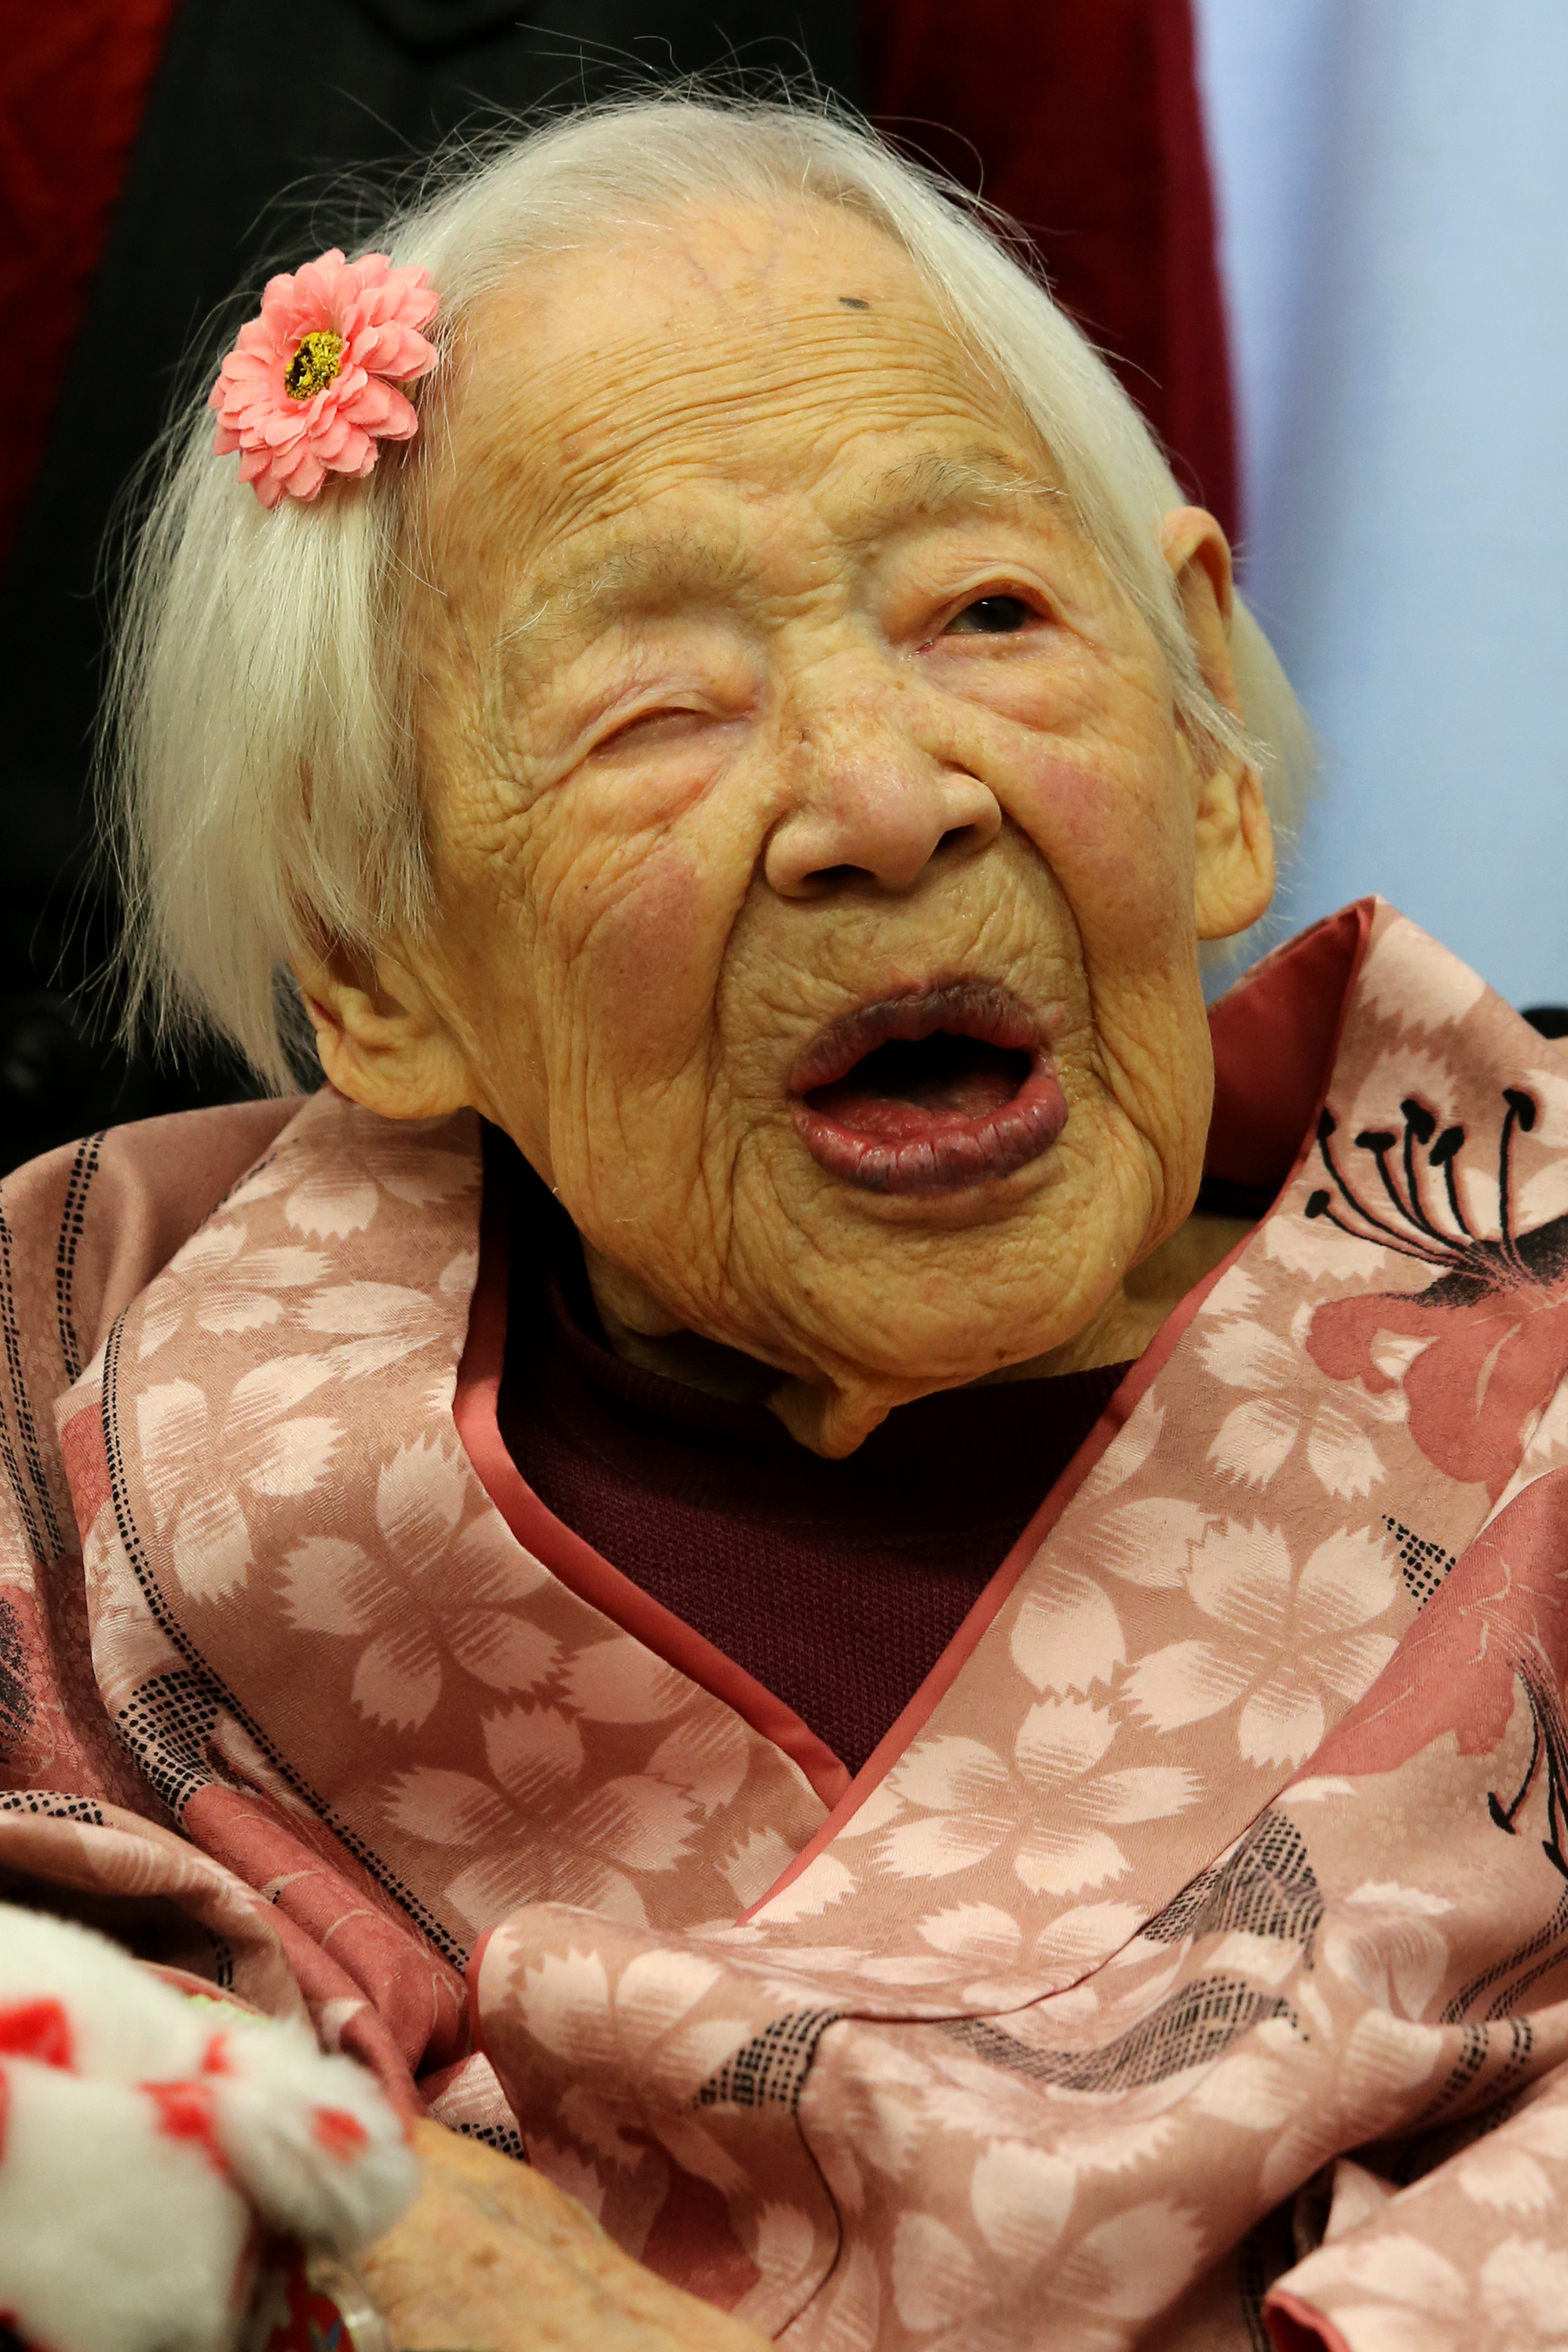 Misao Okawa, the world's oldest Japanese woman, poses for a photo on her 117th birthday celebration at Kurenai Nursing Home on March 4, 2015, in Osaka, Japan (Buddhika Weerasinghe—Getty Images)